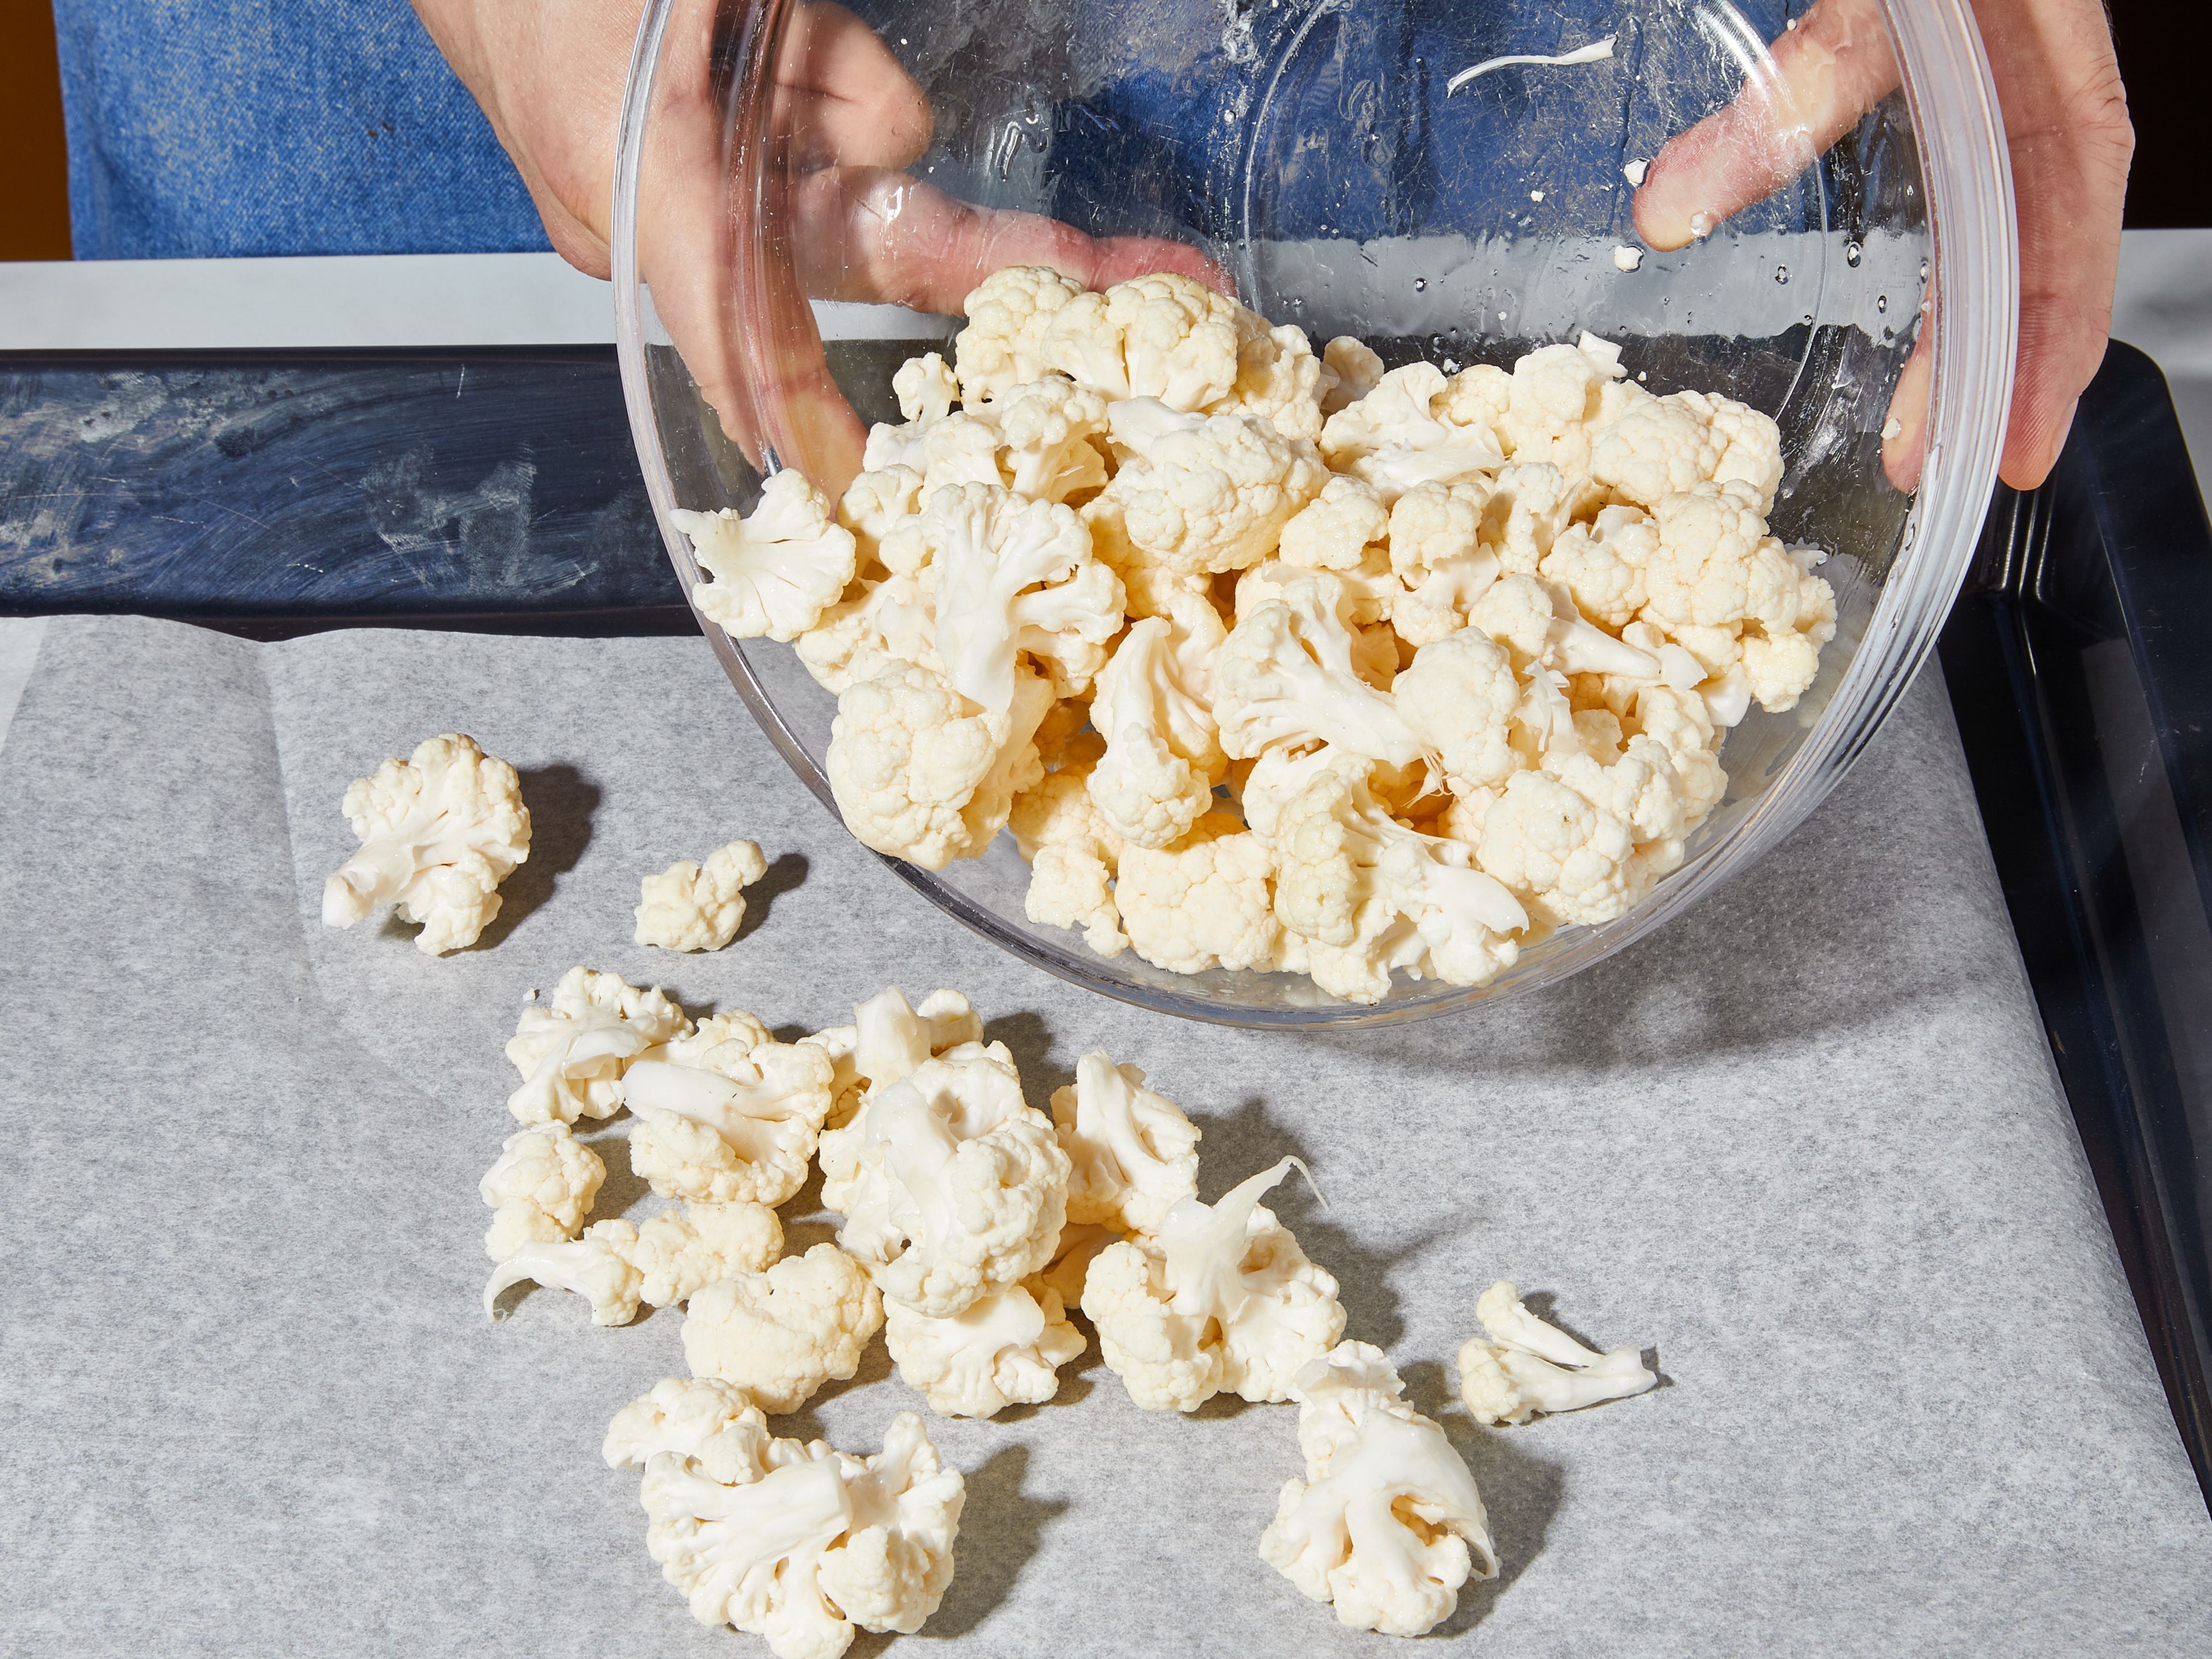 Preheat the oven to 220ºC/430ºF fan. Cut or use your hands to separate the cauliflower into small bite sized-florets. Add the cauliflower florets to a baking sheet lined with parchment paper. ​​Toss the cauliflower in vegetable oil and season with salt. Roast for approx. 18–20 min., until the cauliflowers are cooked and slightly charred.